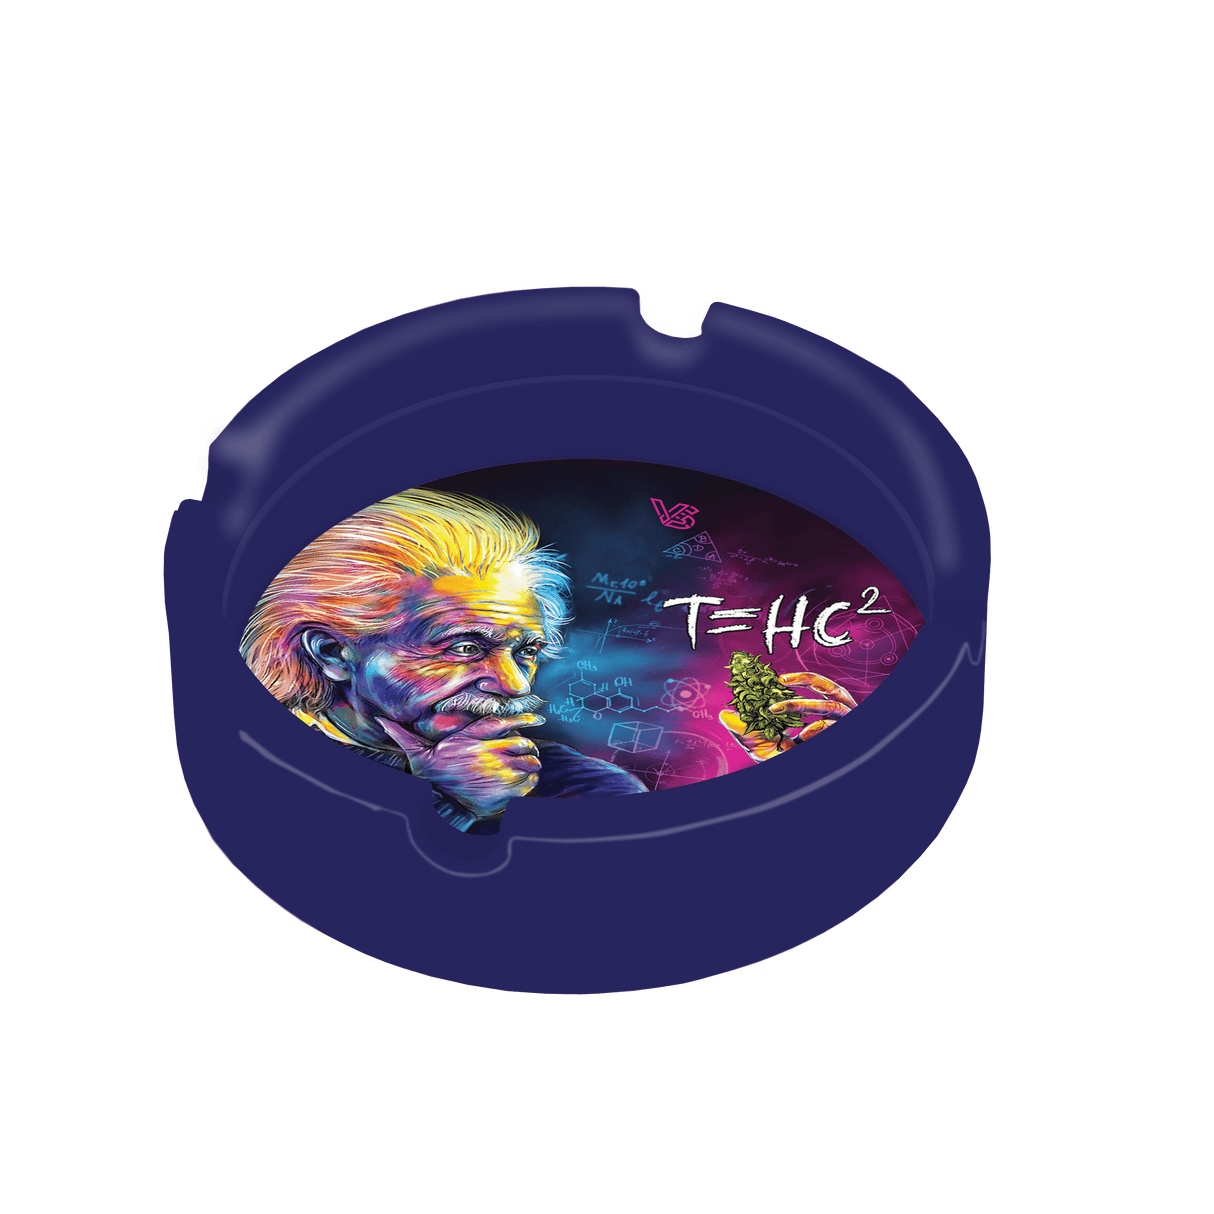 V Syndicate T=HC2 Einstein Silicone Ashtray in Blue, Portable & Durable, Top View